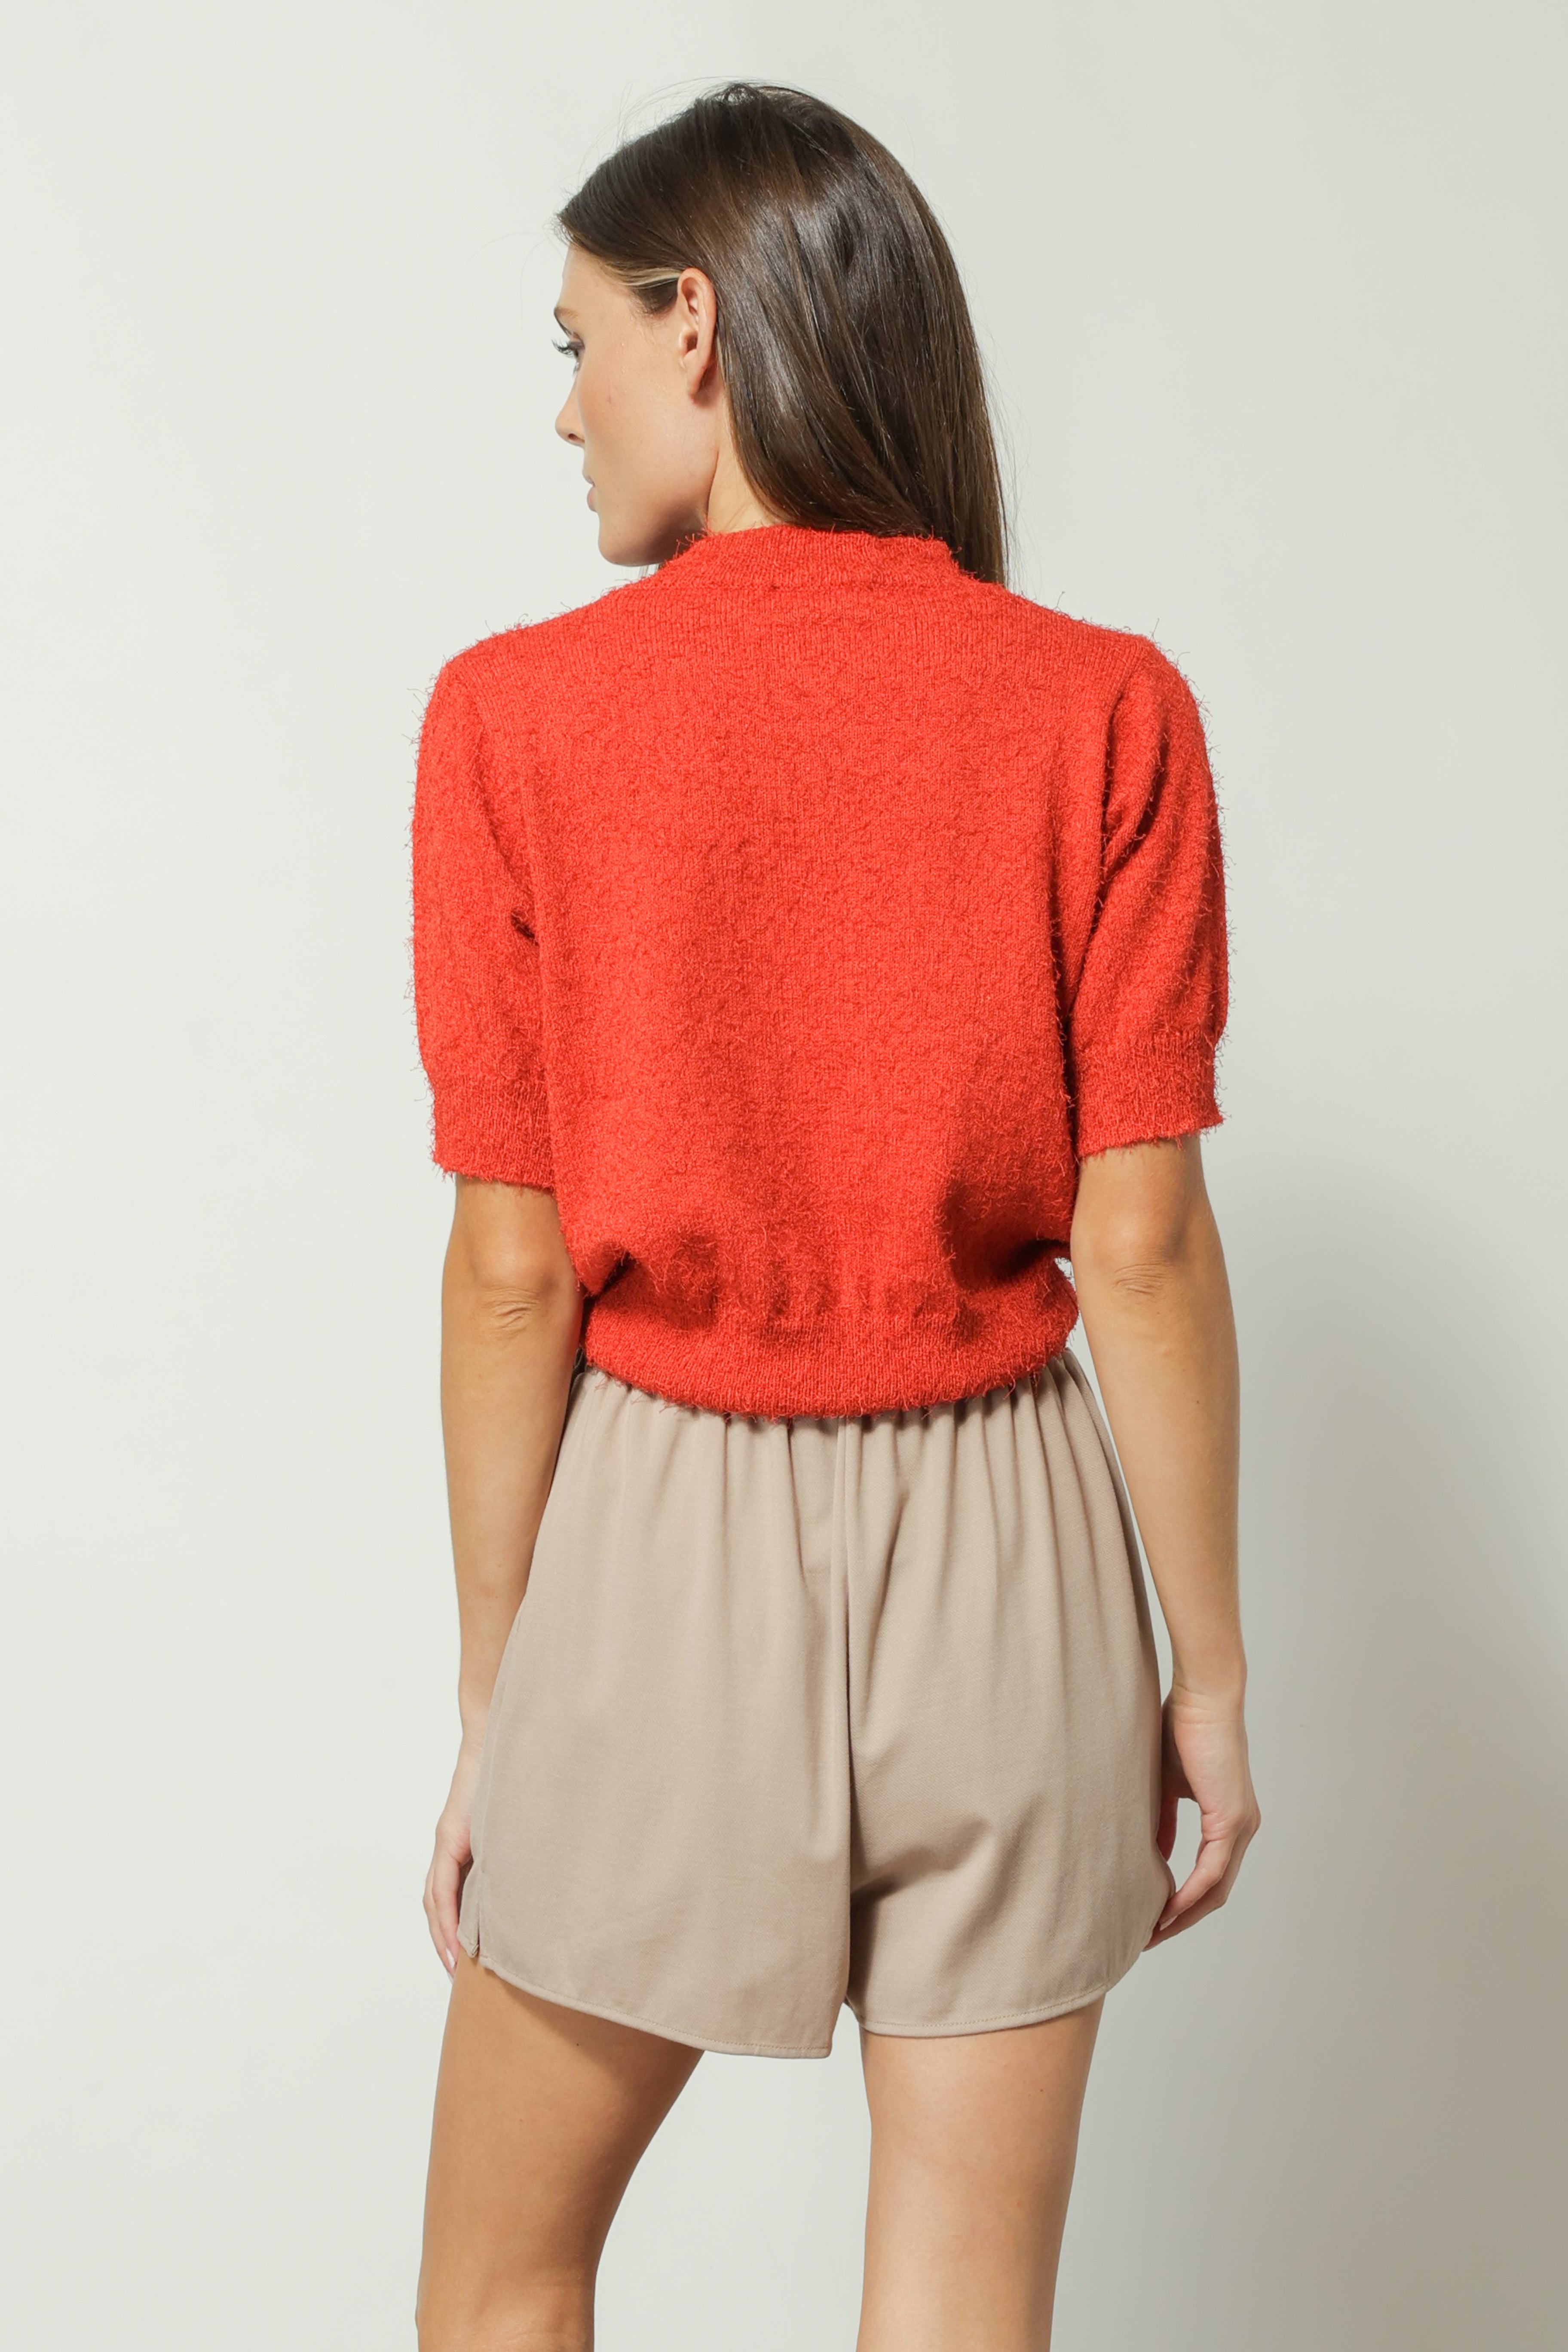 EVELYN SWEATER TOP – Line & Dot